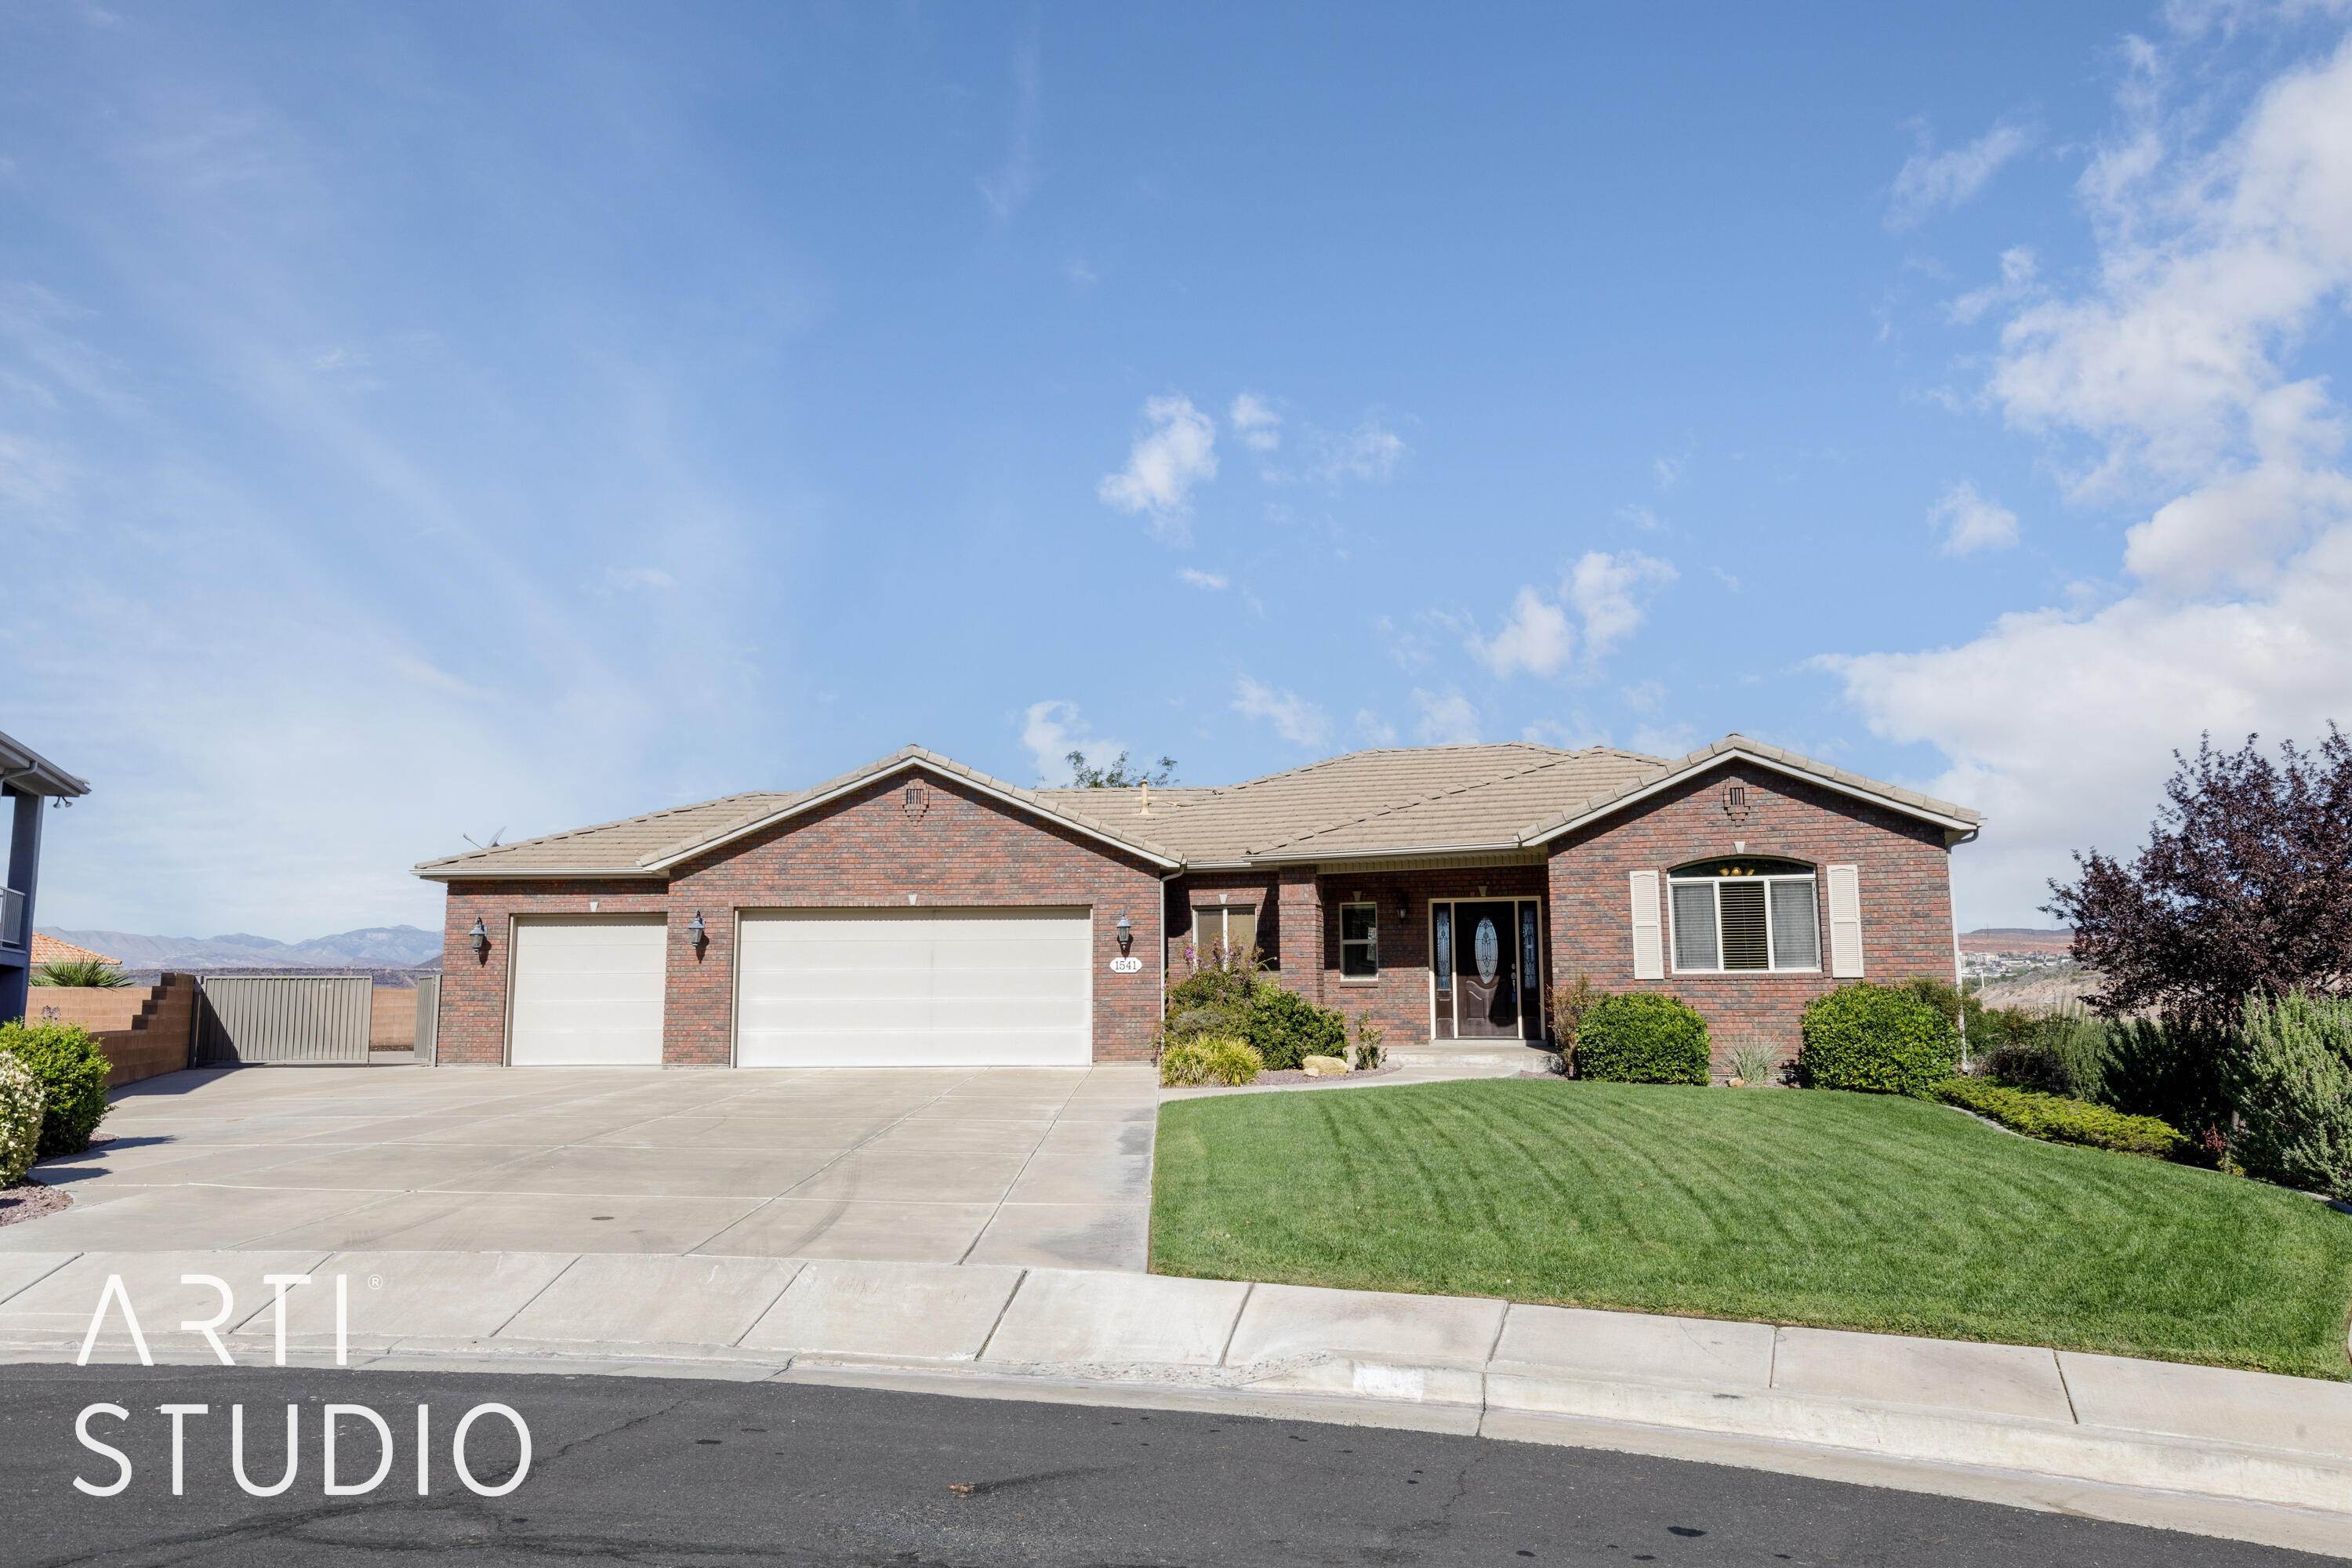 Single Family for Sale at St. George, UT 84790